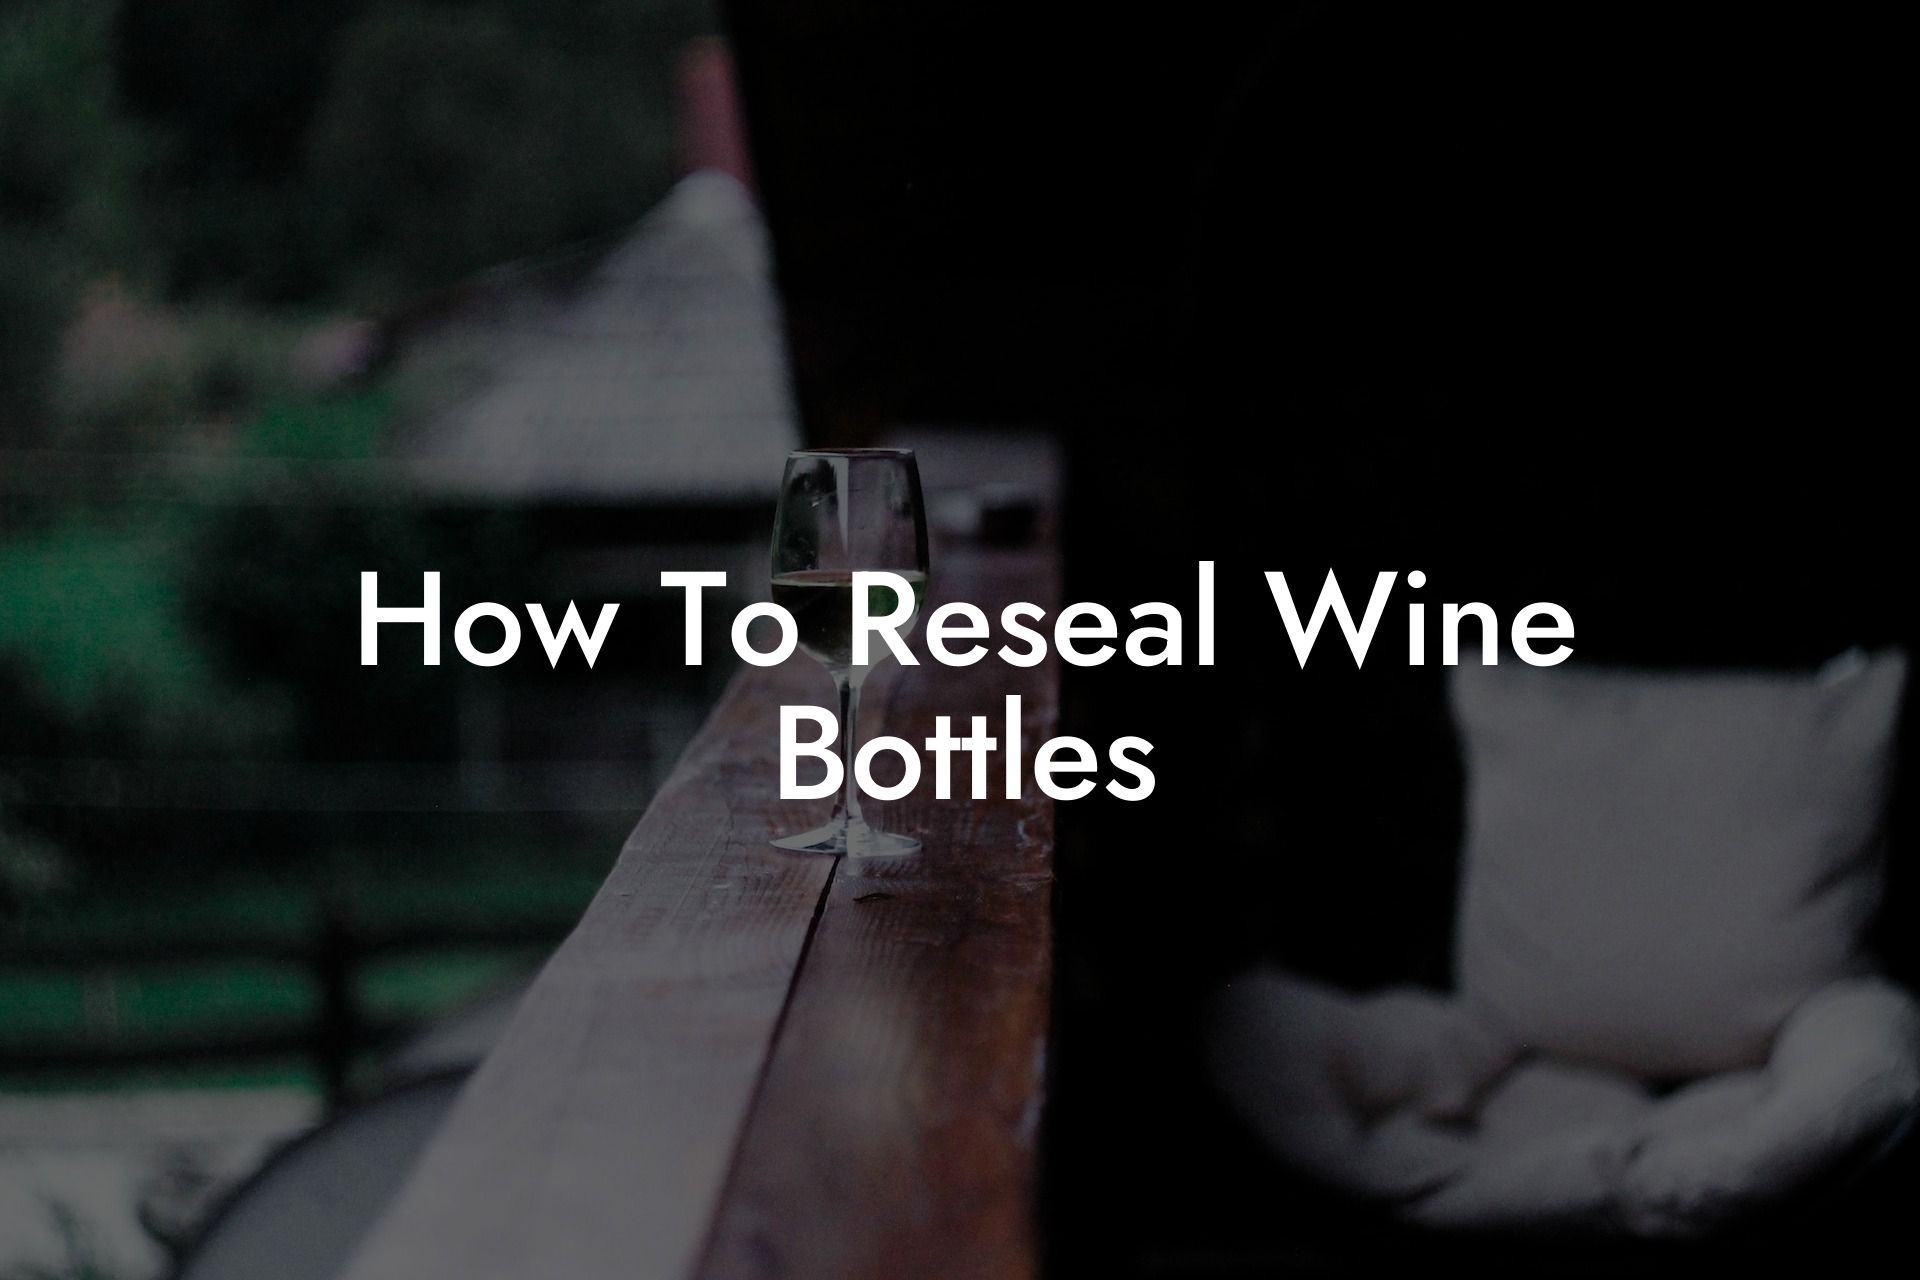 How To Reseal Wine Bottles